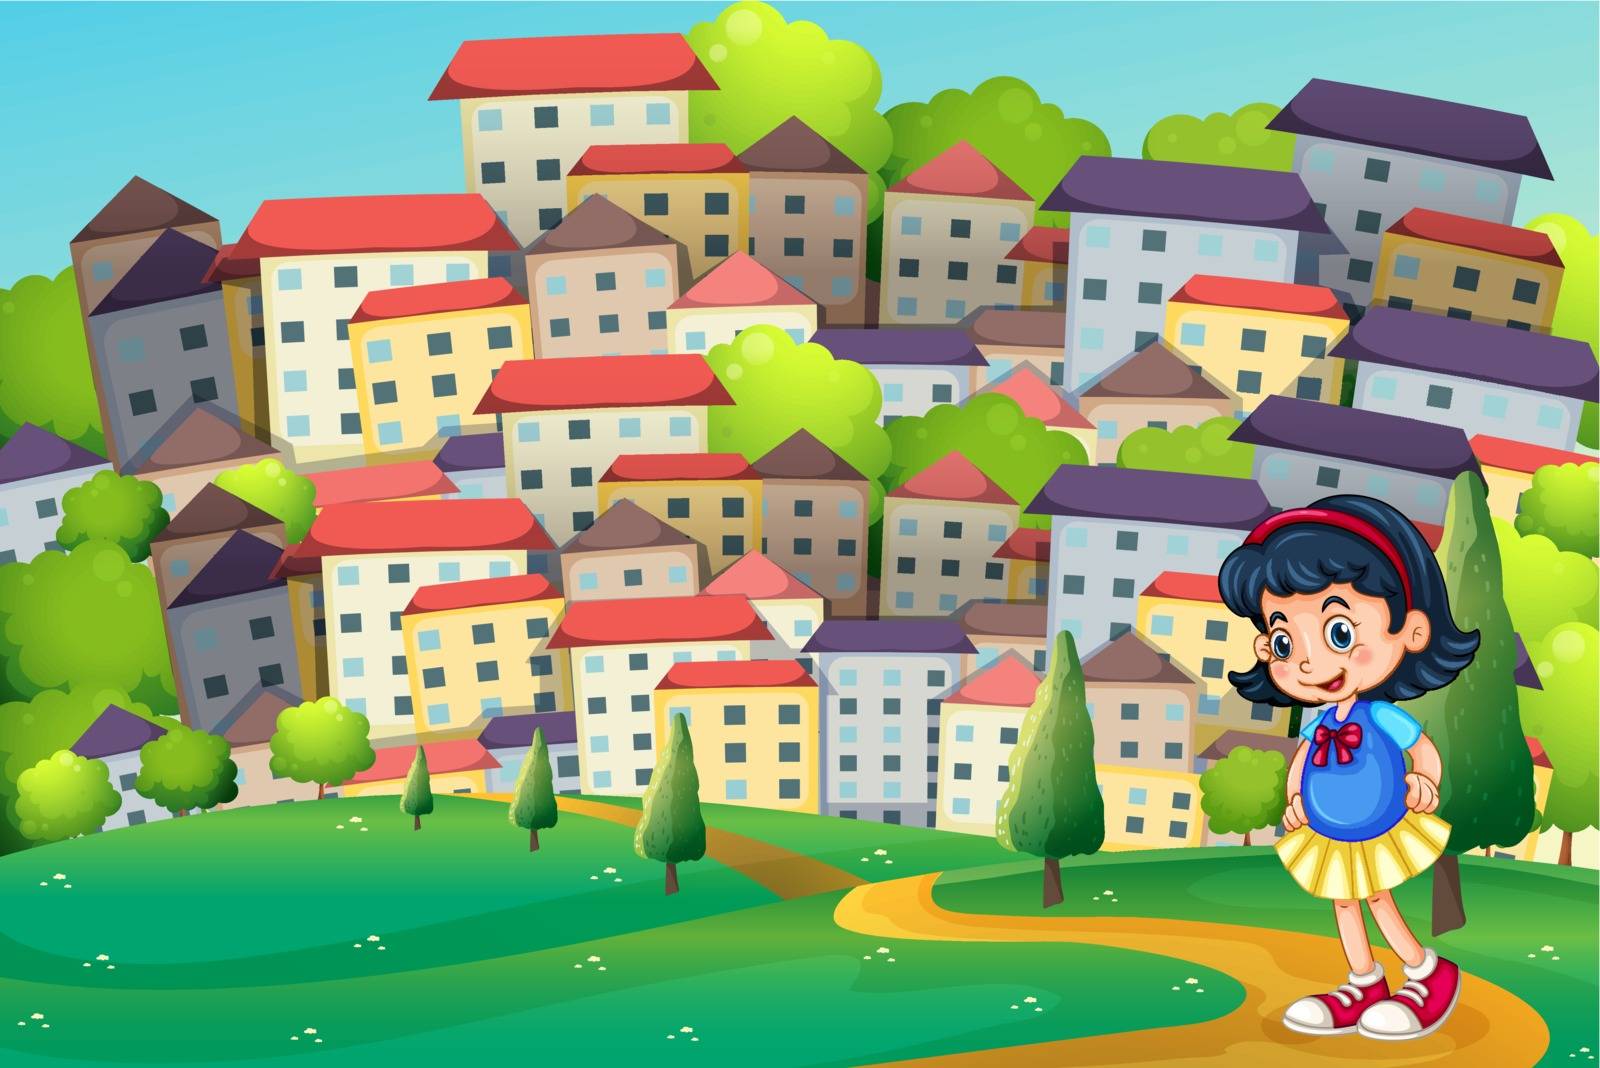 Illustration of a young girl walking at the hilltop across the tall buildings